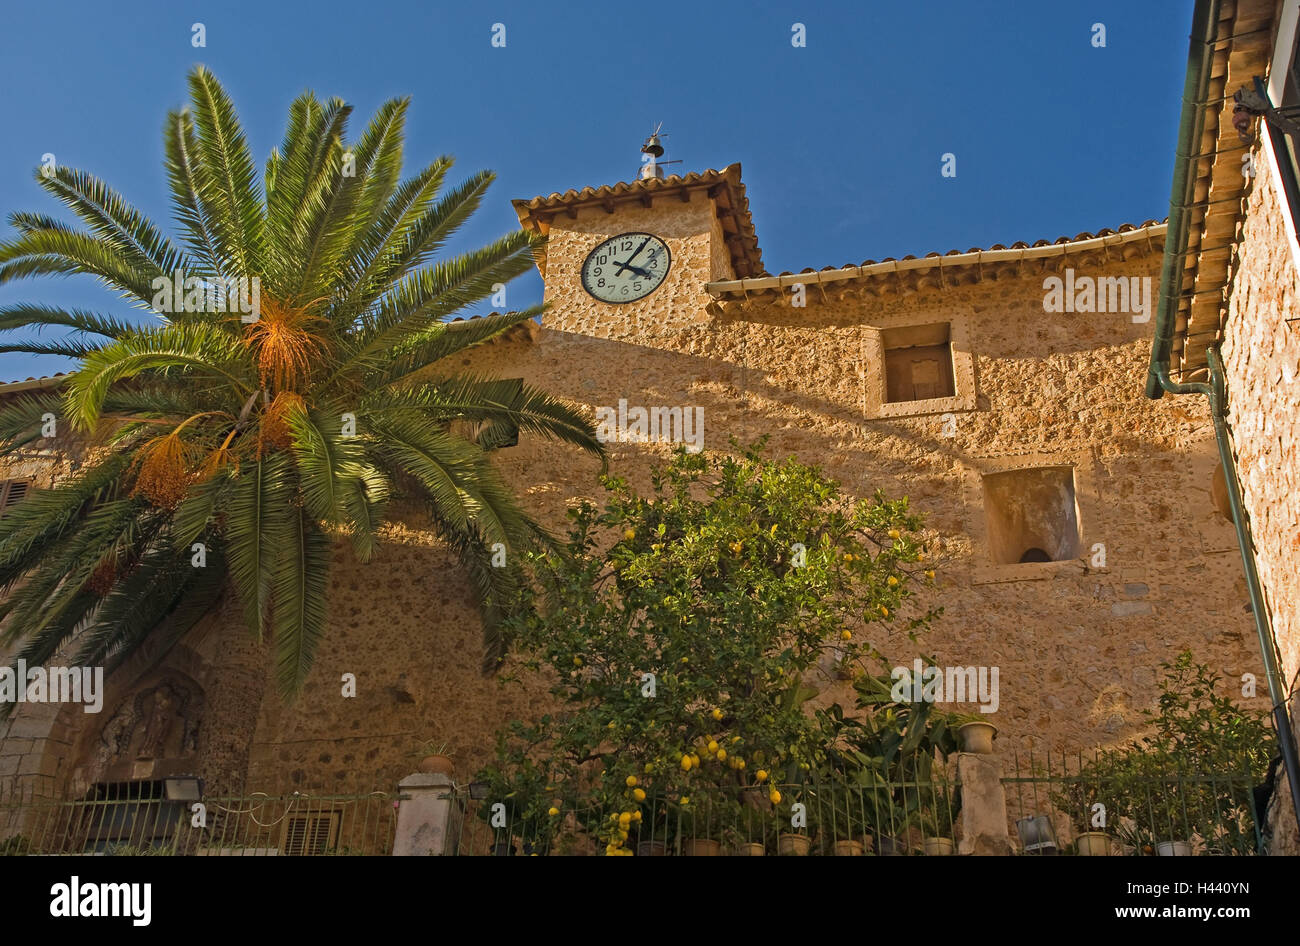 Spain, Majorca, Fornalutx, building, clock tower, detail, Stock Photo